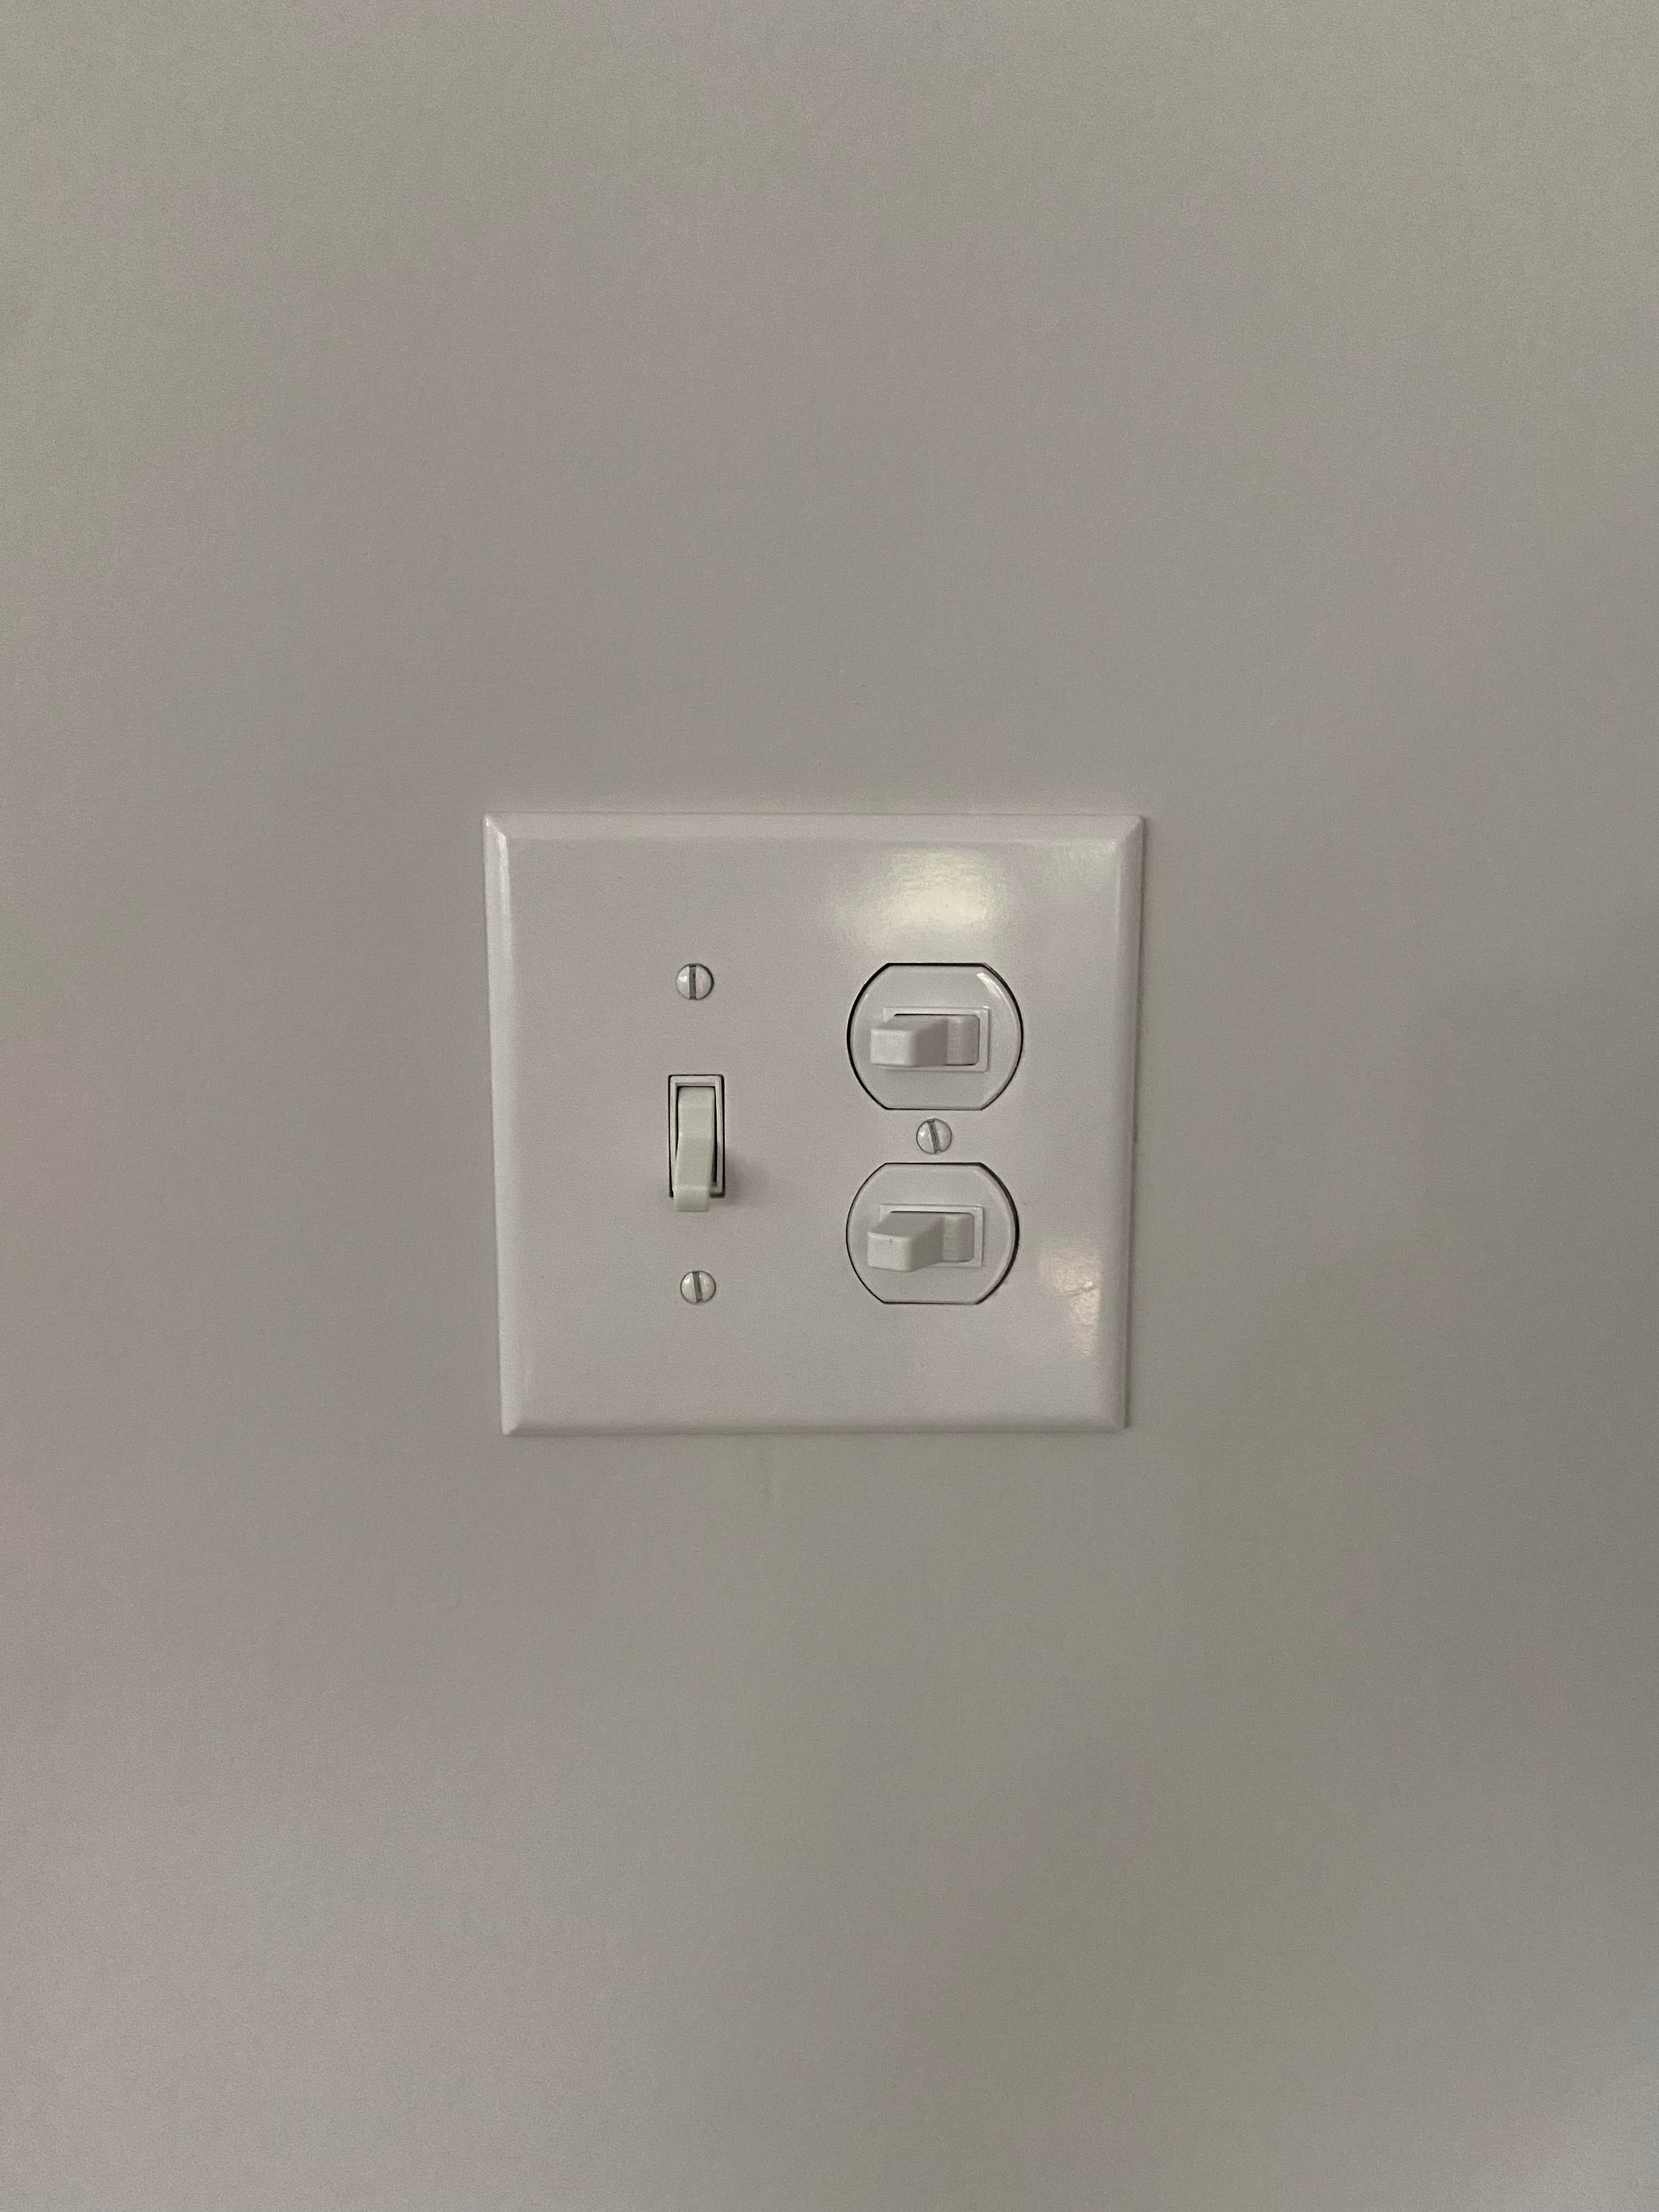 How to solve this with the Lutron